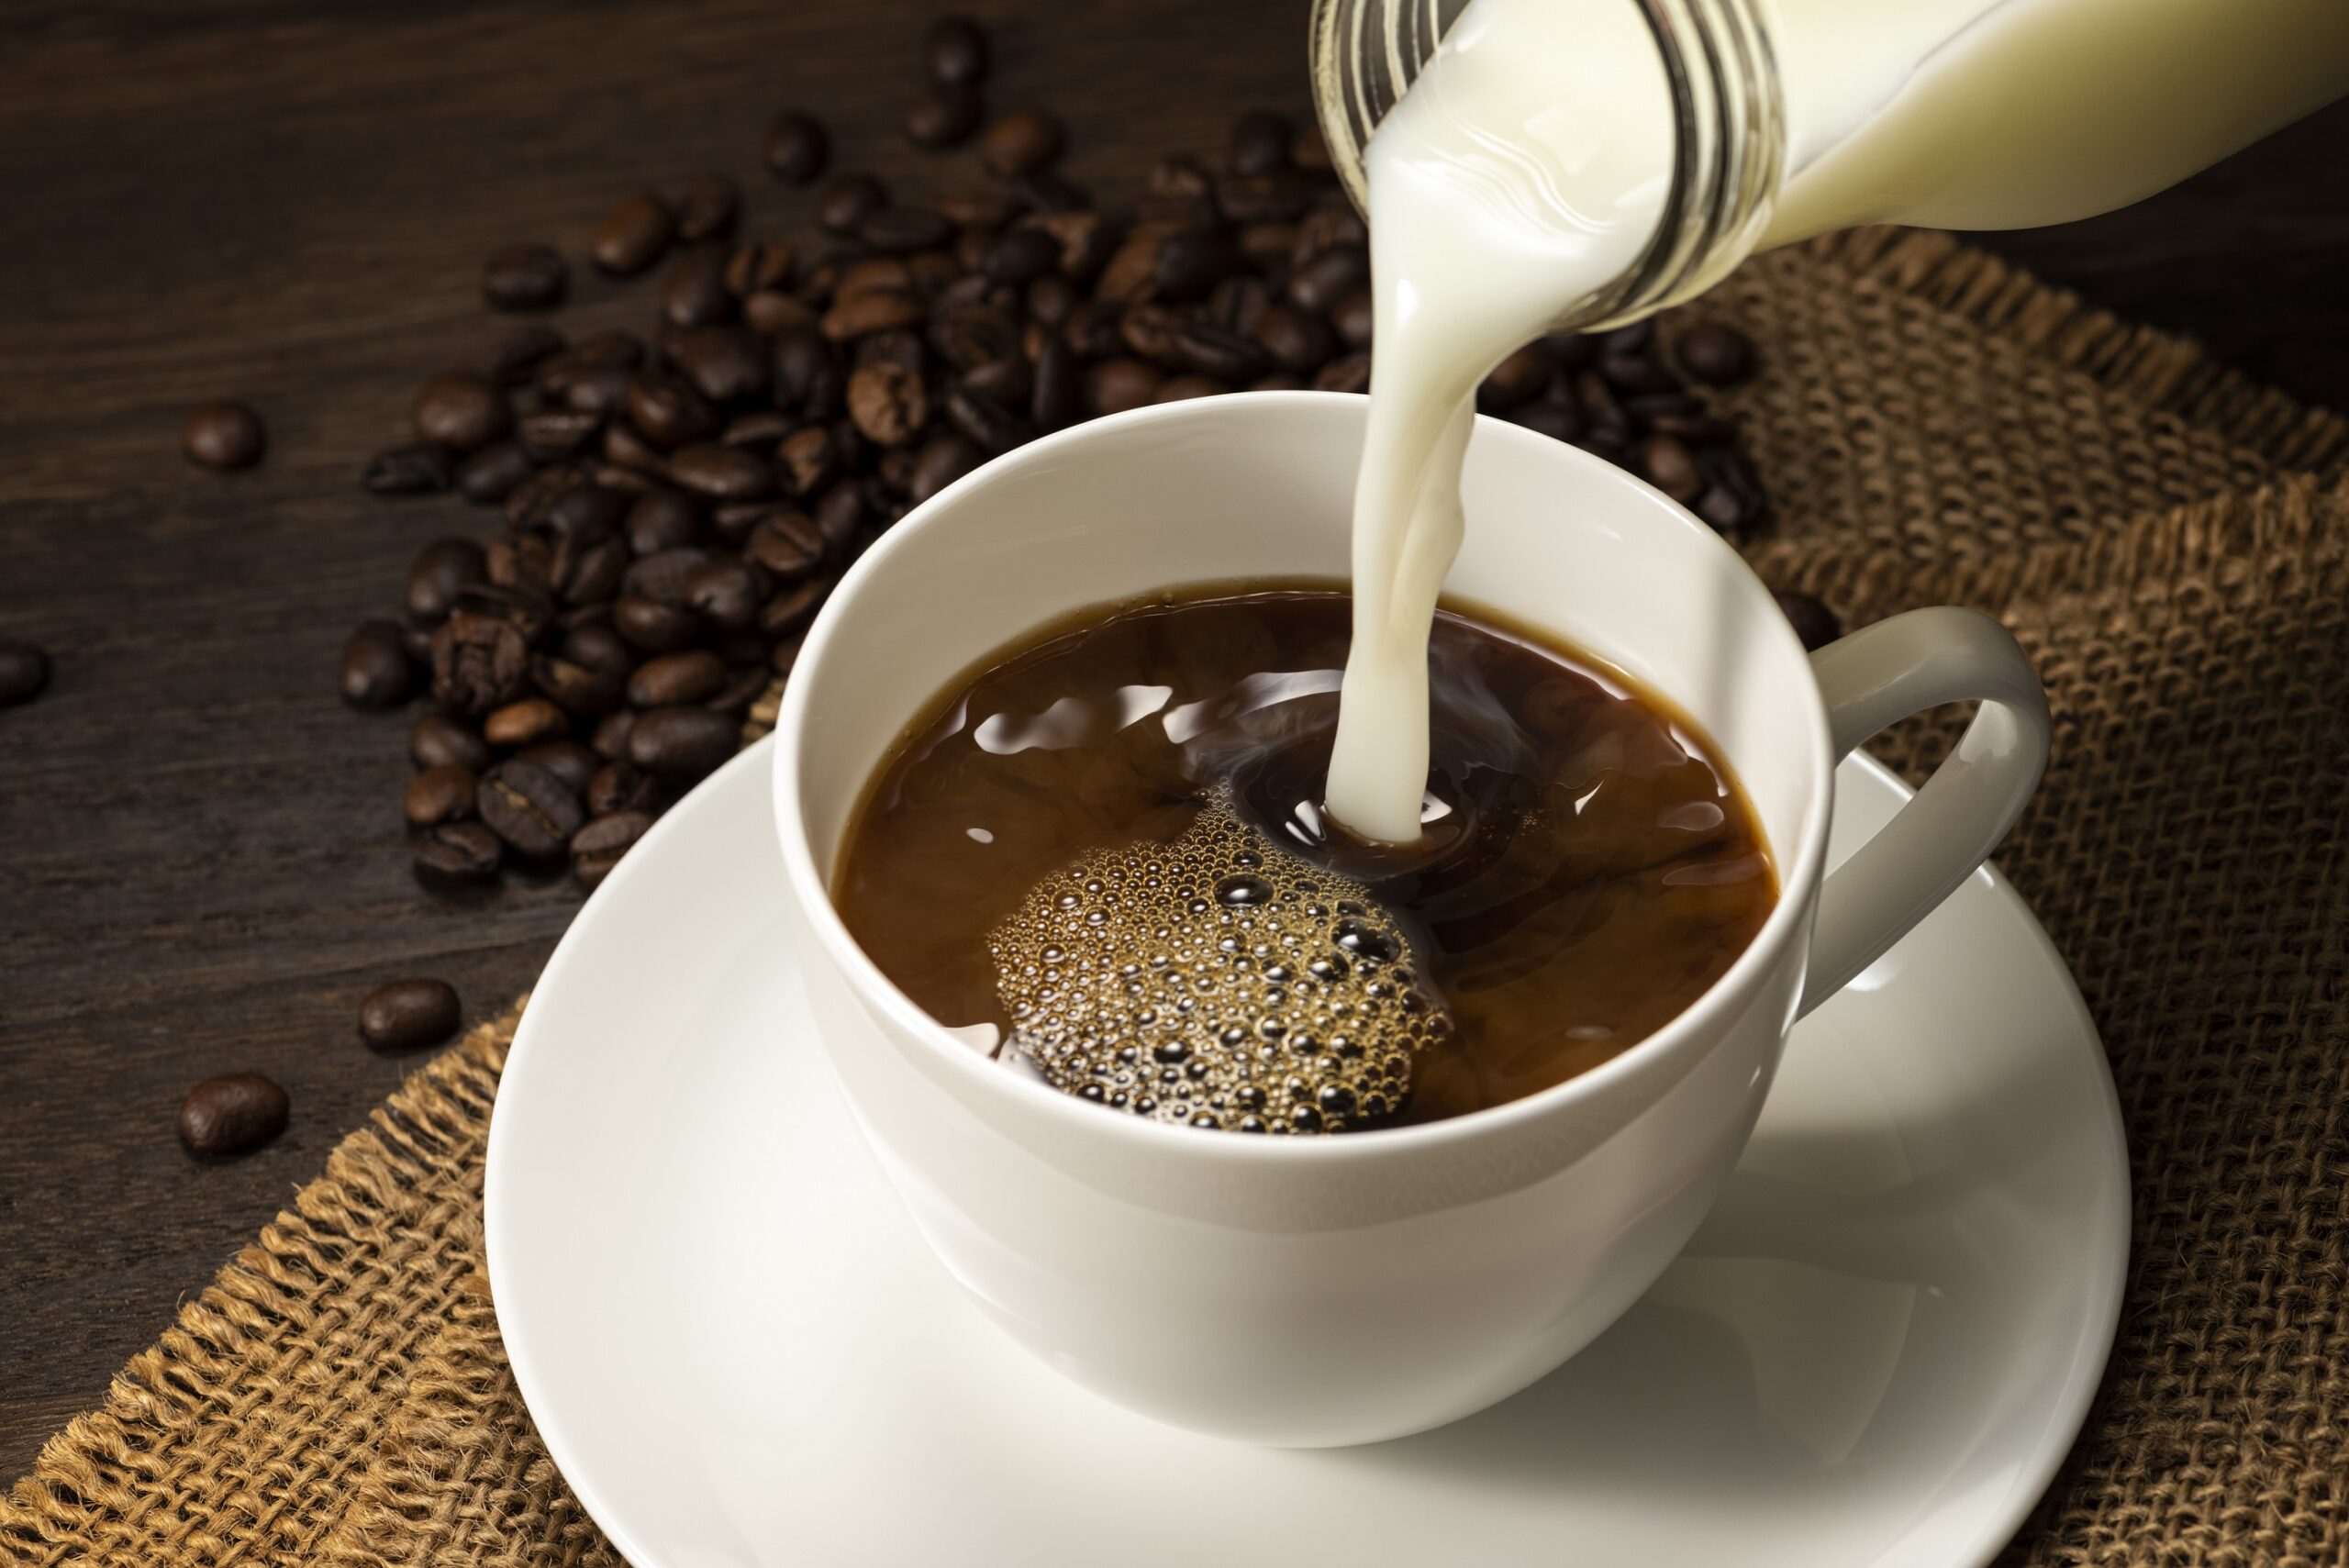 Coffee with cow's milk or oat milk - which is healthier?